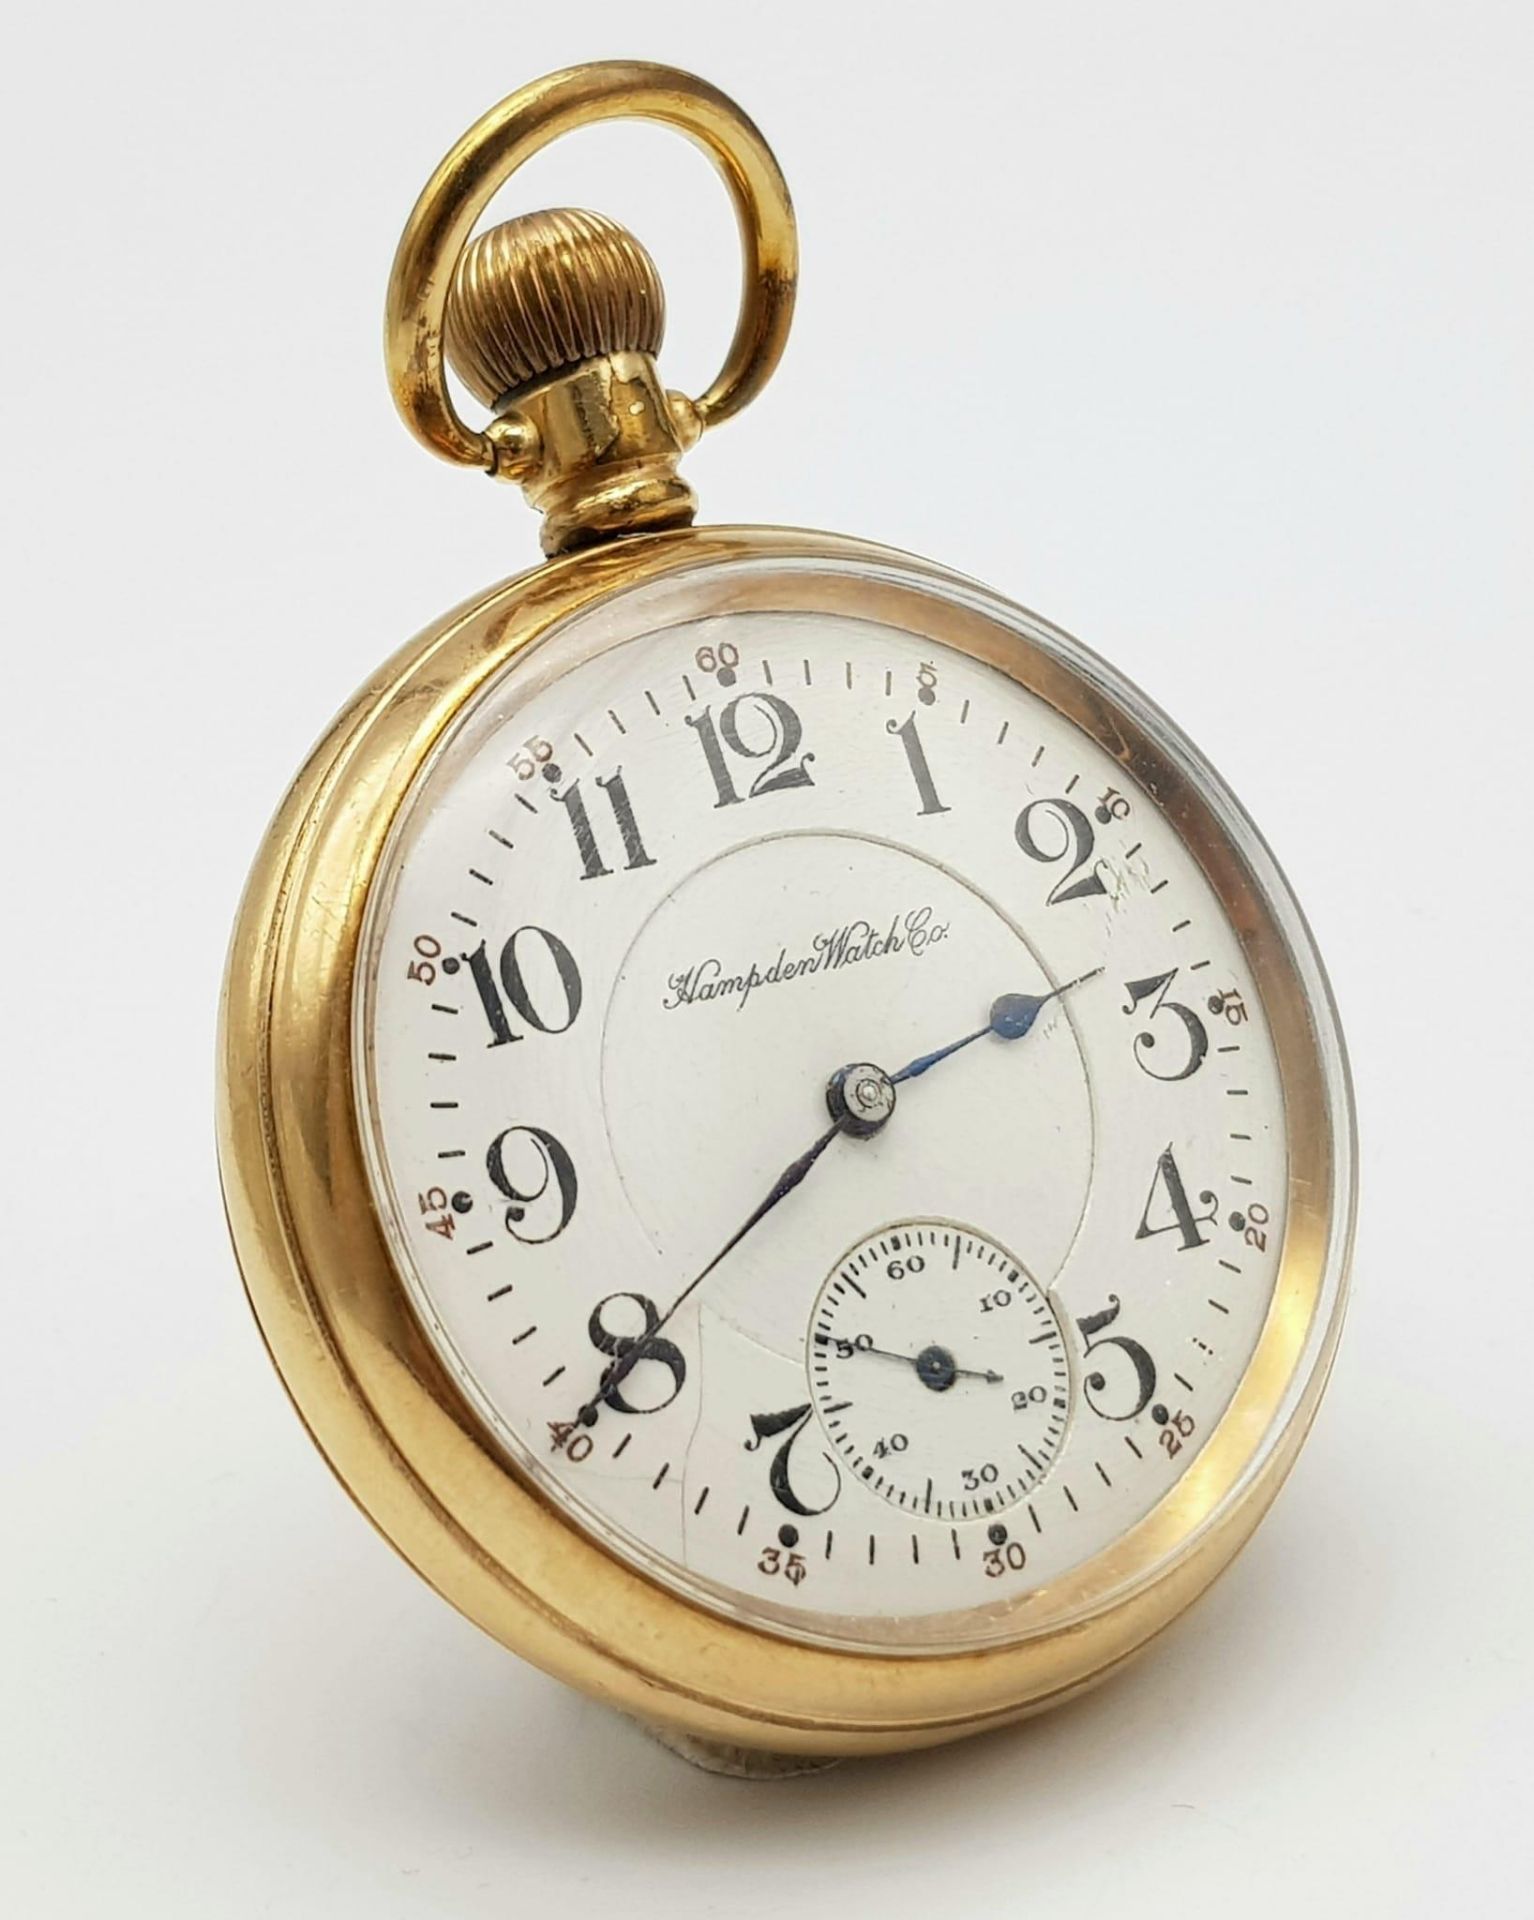 An Antique (1915) Gold Plated Hampden Watch Co. Pocket Watch. 21 jewels. 3328478 movement. Top - Image 2 of 5